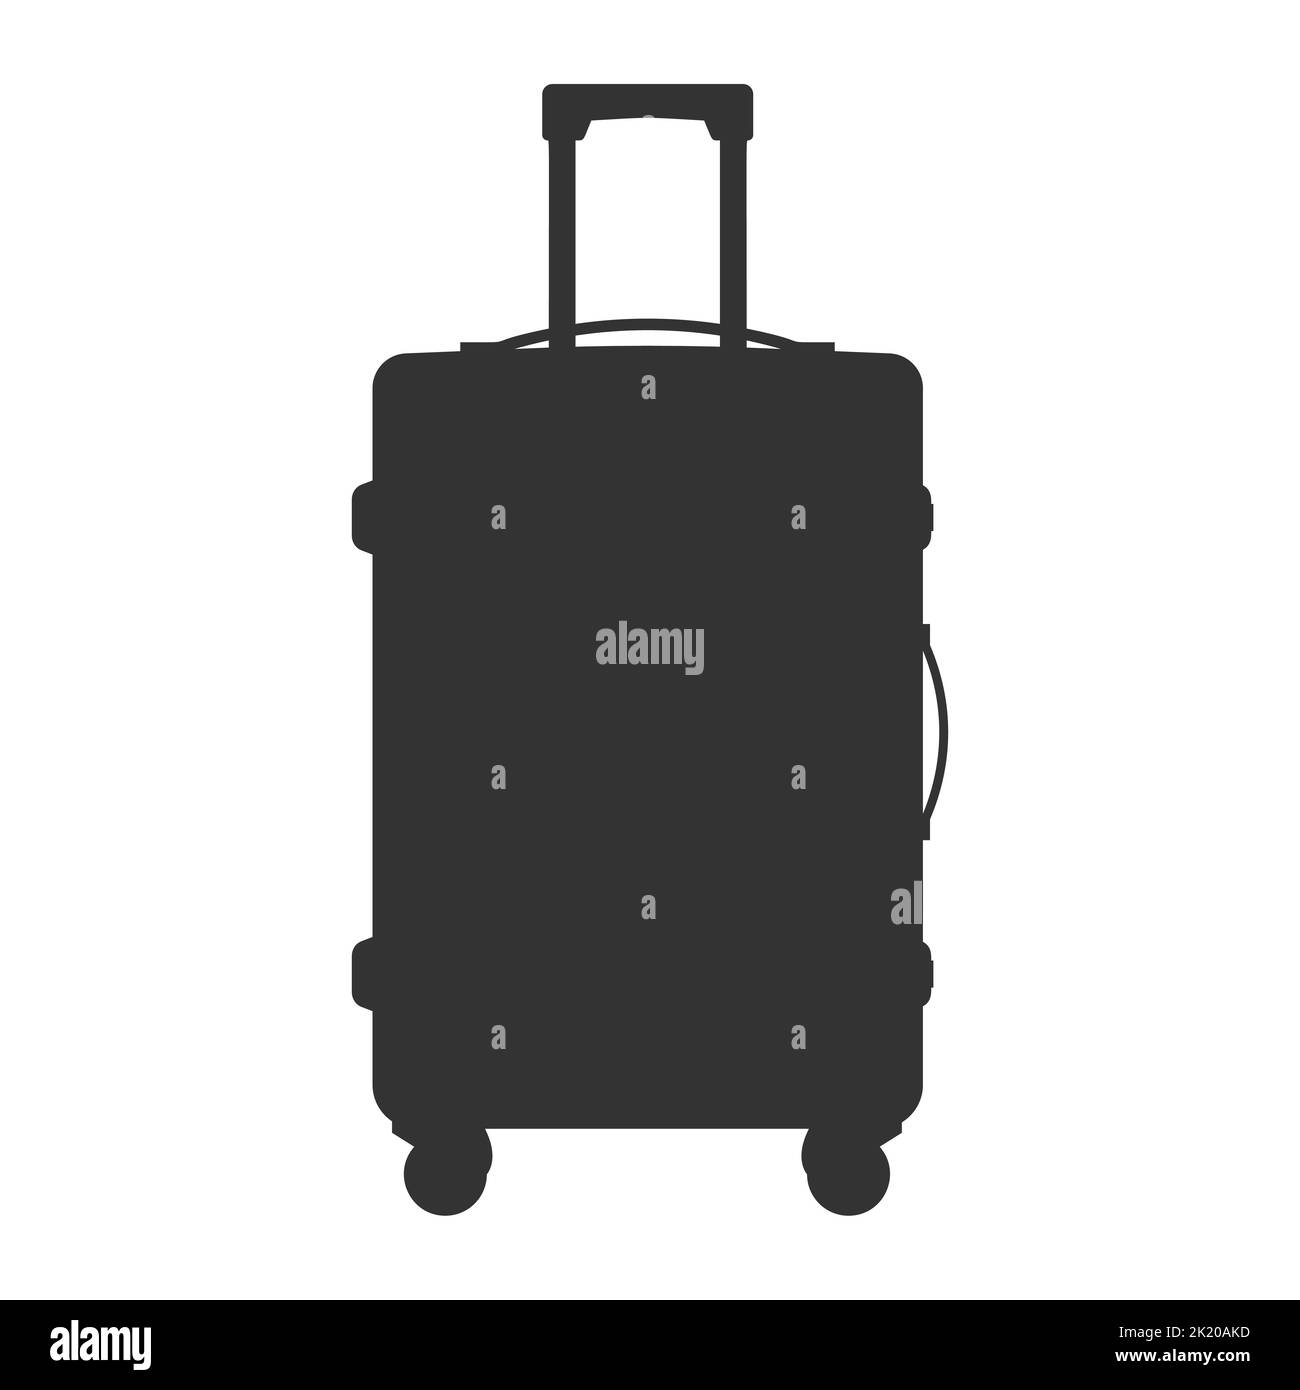 suitcase silhouette isolated on white background, vector illustration Stock Vector